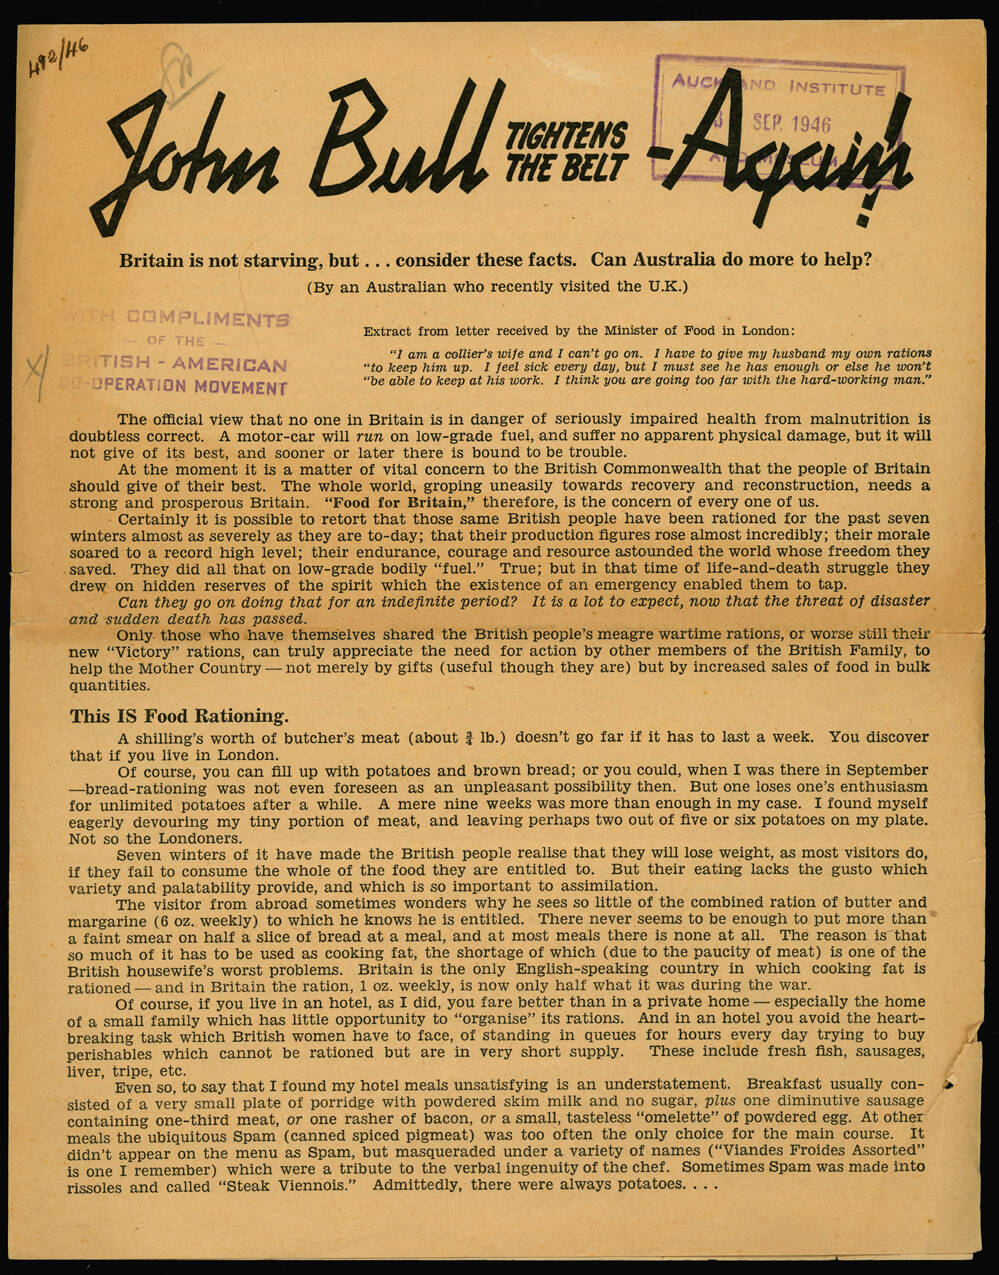 John Bull tightens the belt - Again! - Collections Online